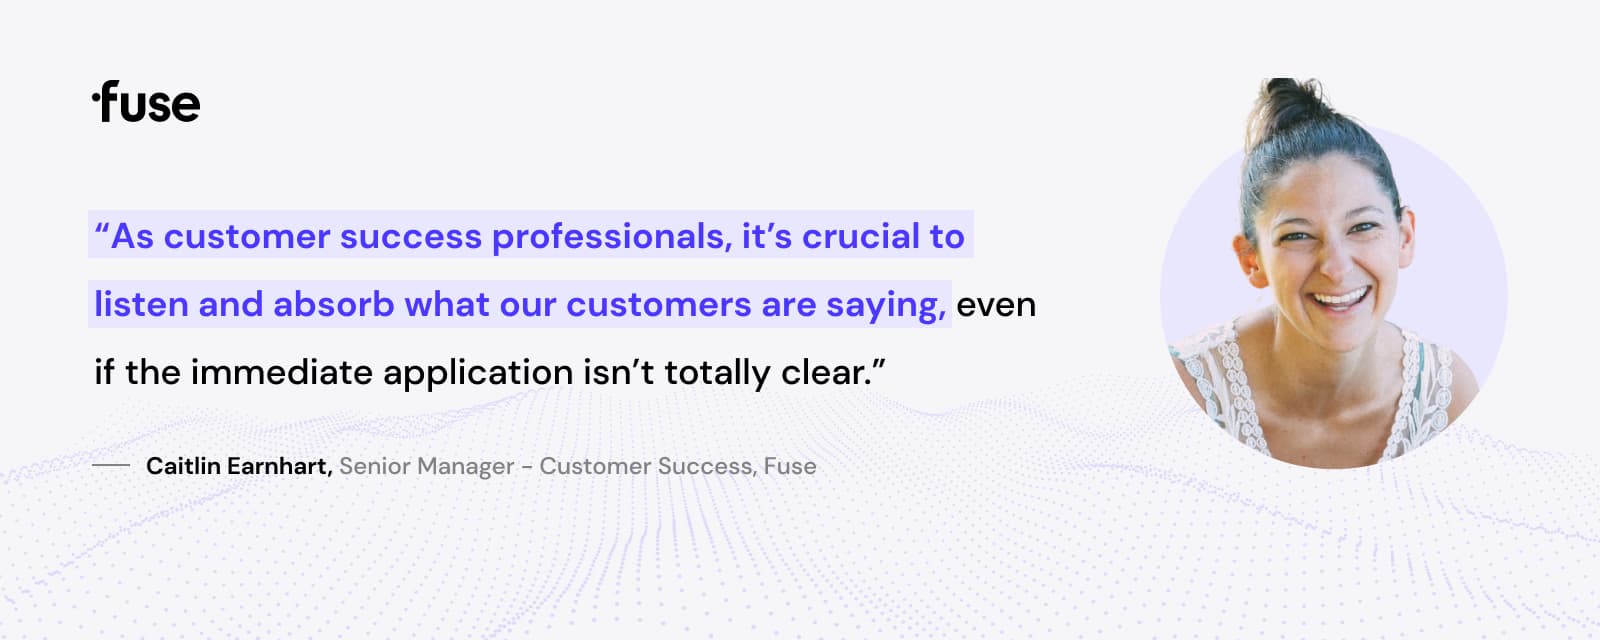 A headshot photograph of Caitlin Earnhart, accompanied by text that reads: "As customer success professionals, it's crucial to listen and absorb what our customers are saying, even if the immediate application isn't totally clear."